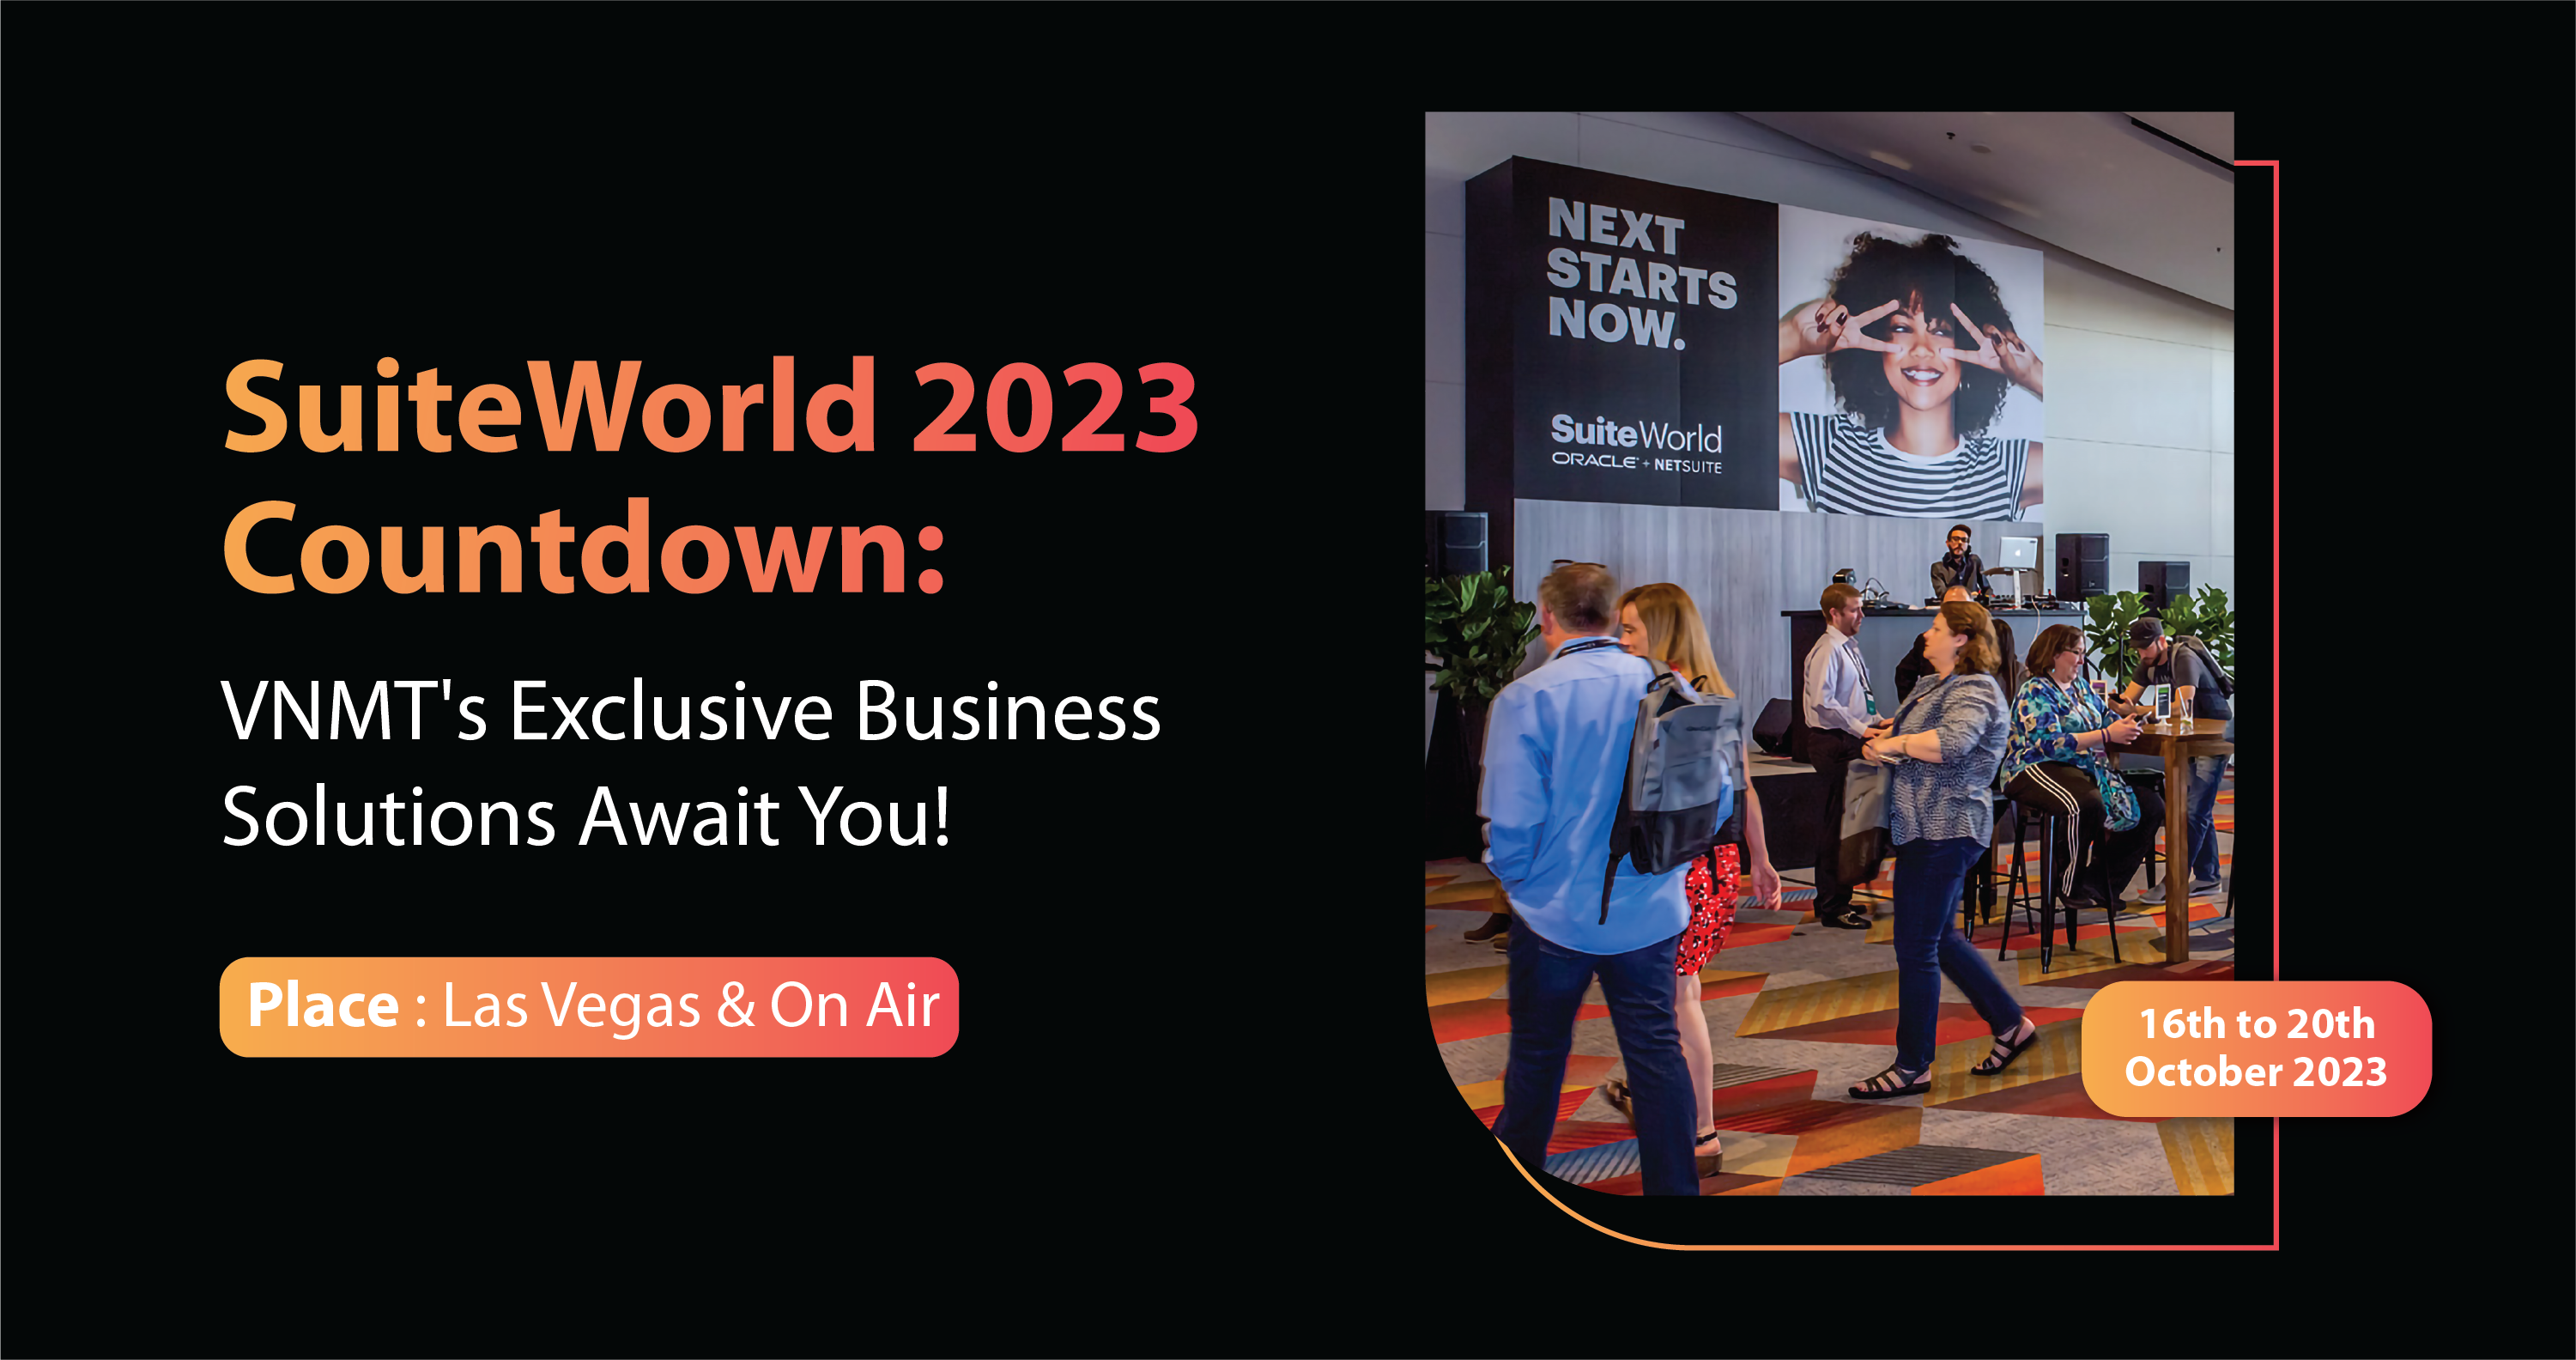 SuiteWorld 2023 Countdown: Join Us for Exclusive Business Solutions